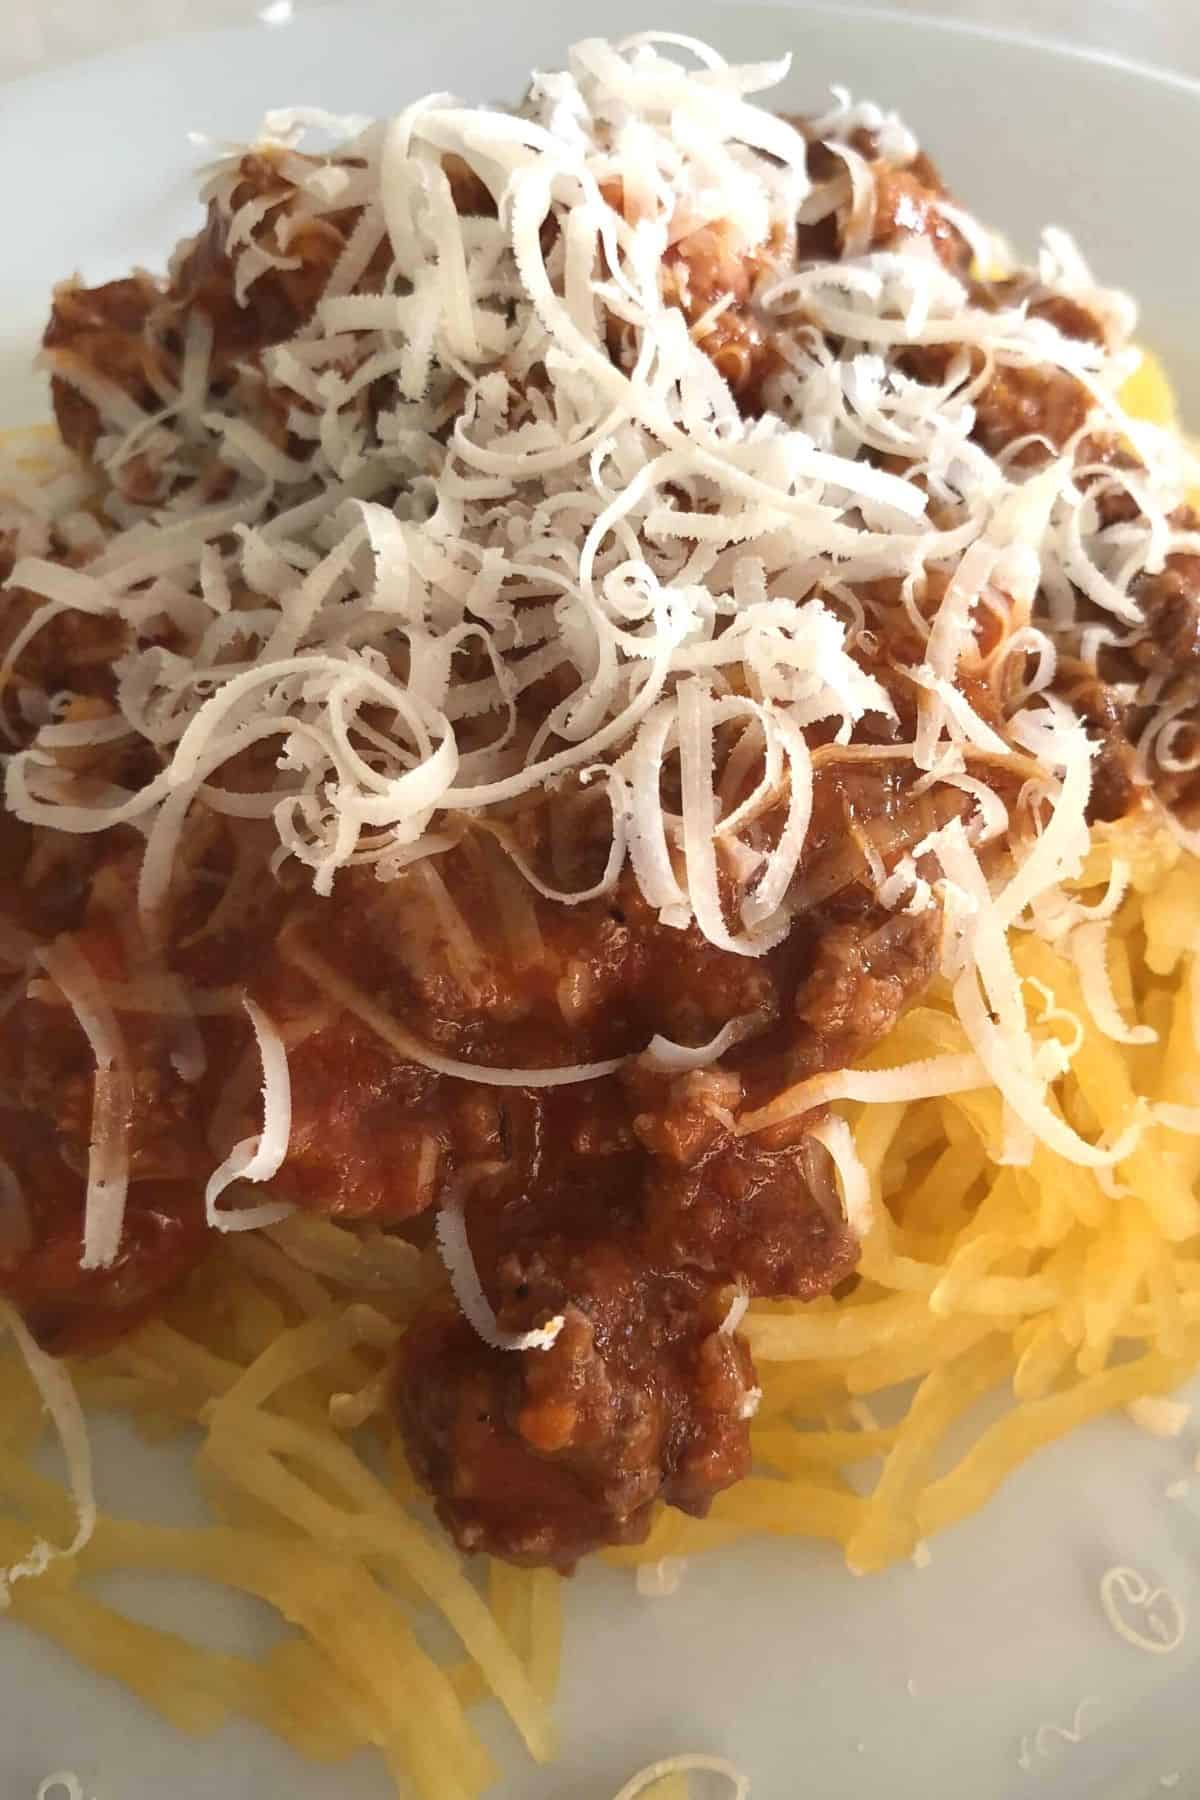 spaghetti squash noodles topped with a meat sauce and grated parmesan.